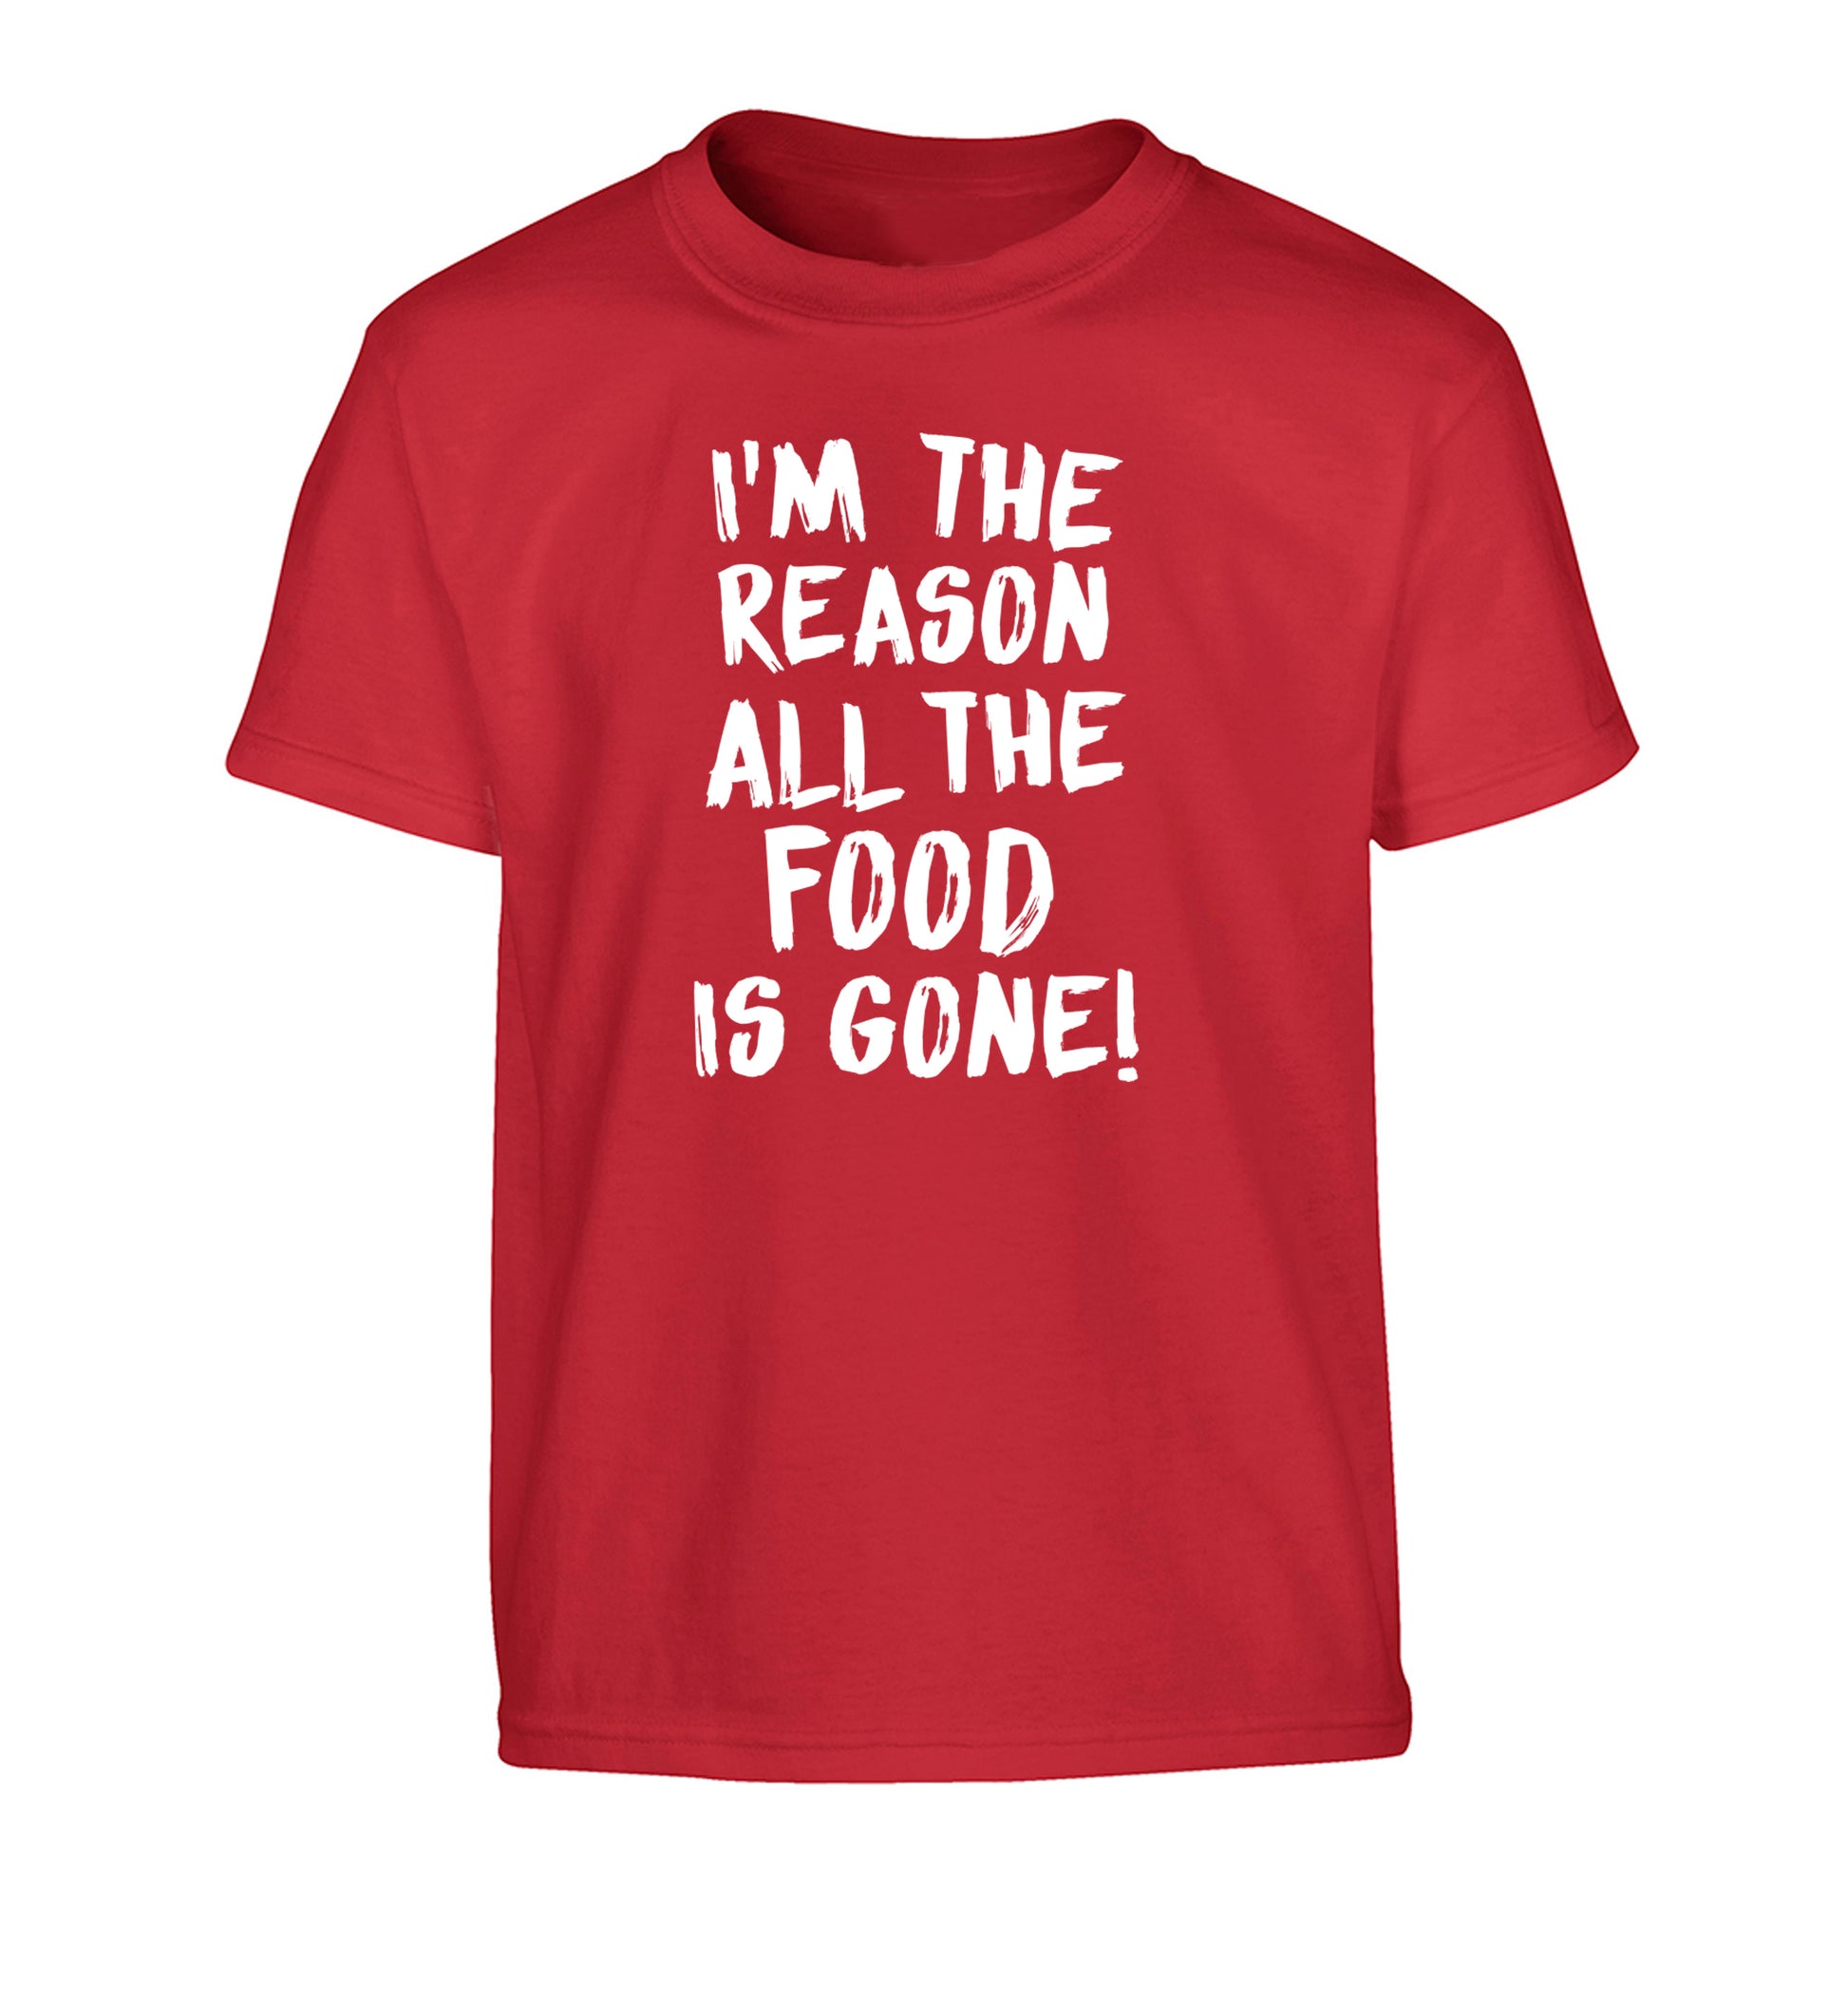 I'm the reason why all the food is gone Children's red Tshirt 12-13 Years